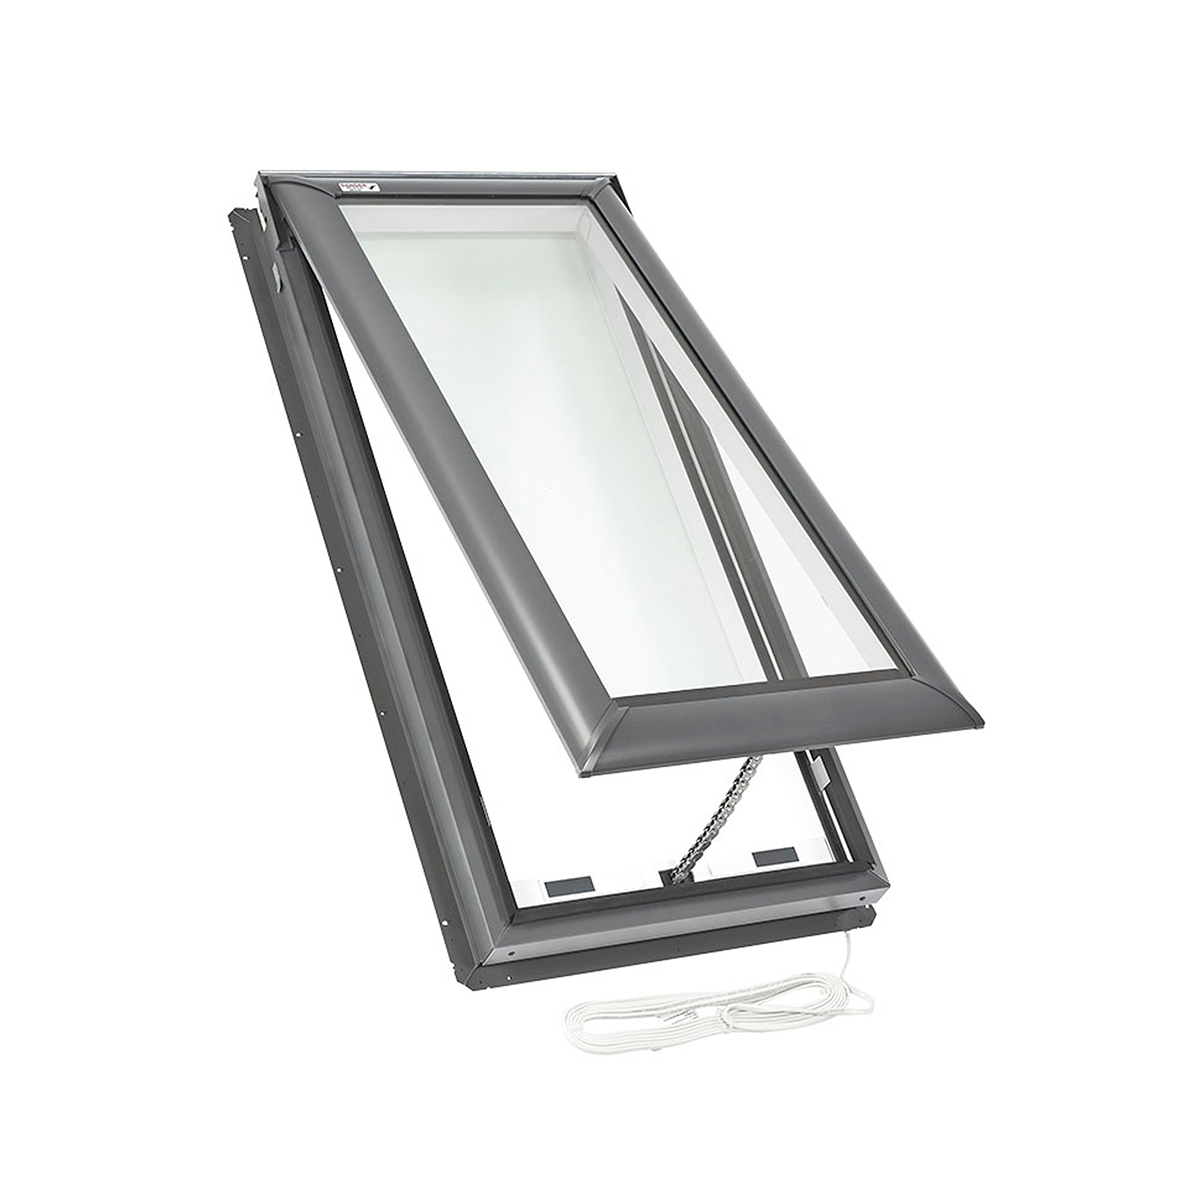 Electric Deck-Mount Skylight with Laminated Low-E3 Glass - 44-1/4 in. x 26-7/8 in. - VSE S01